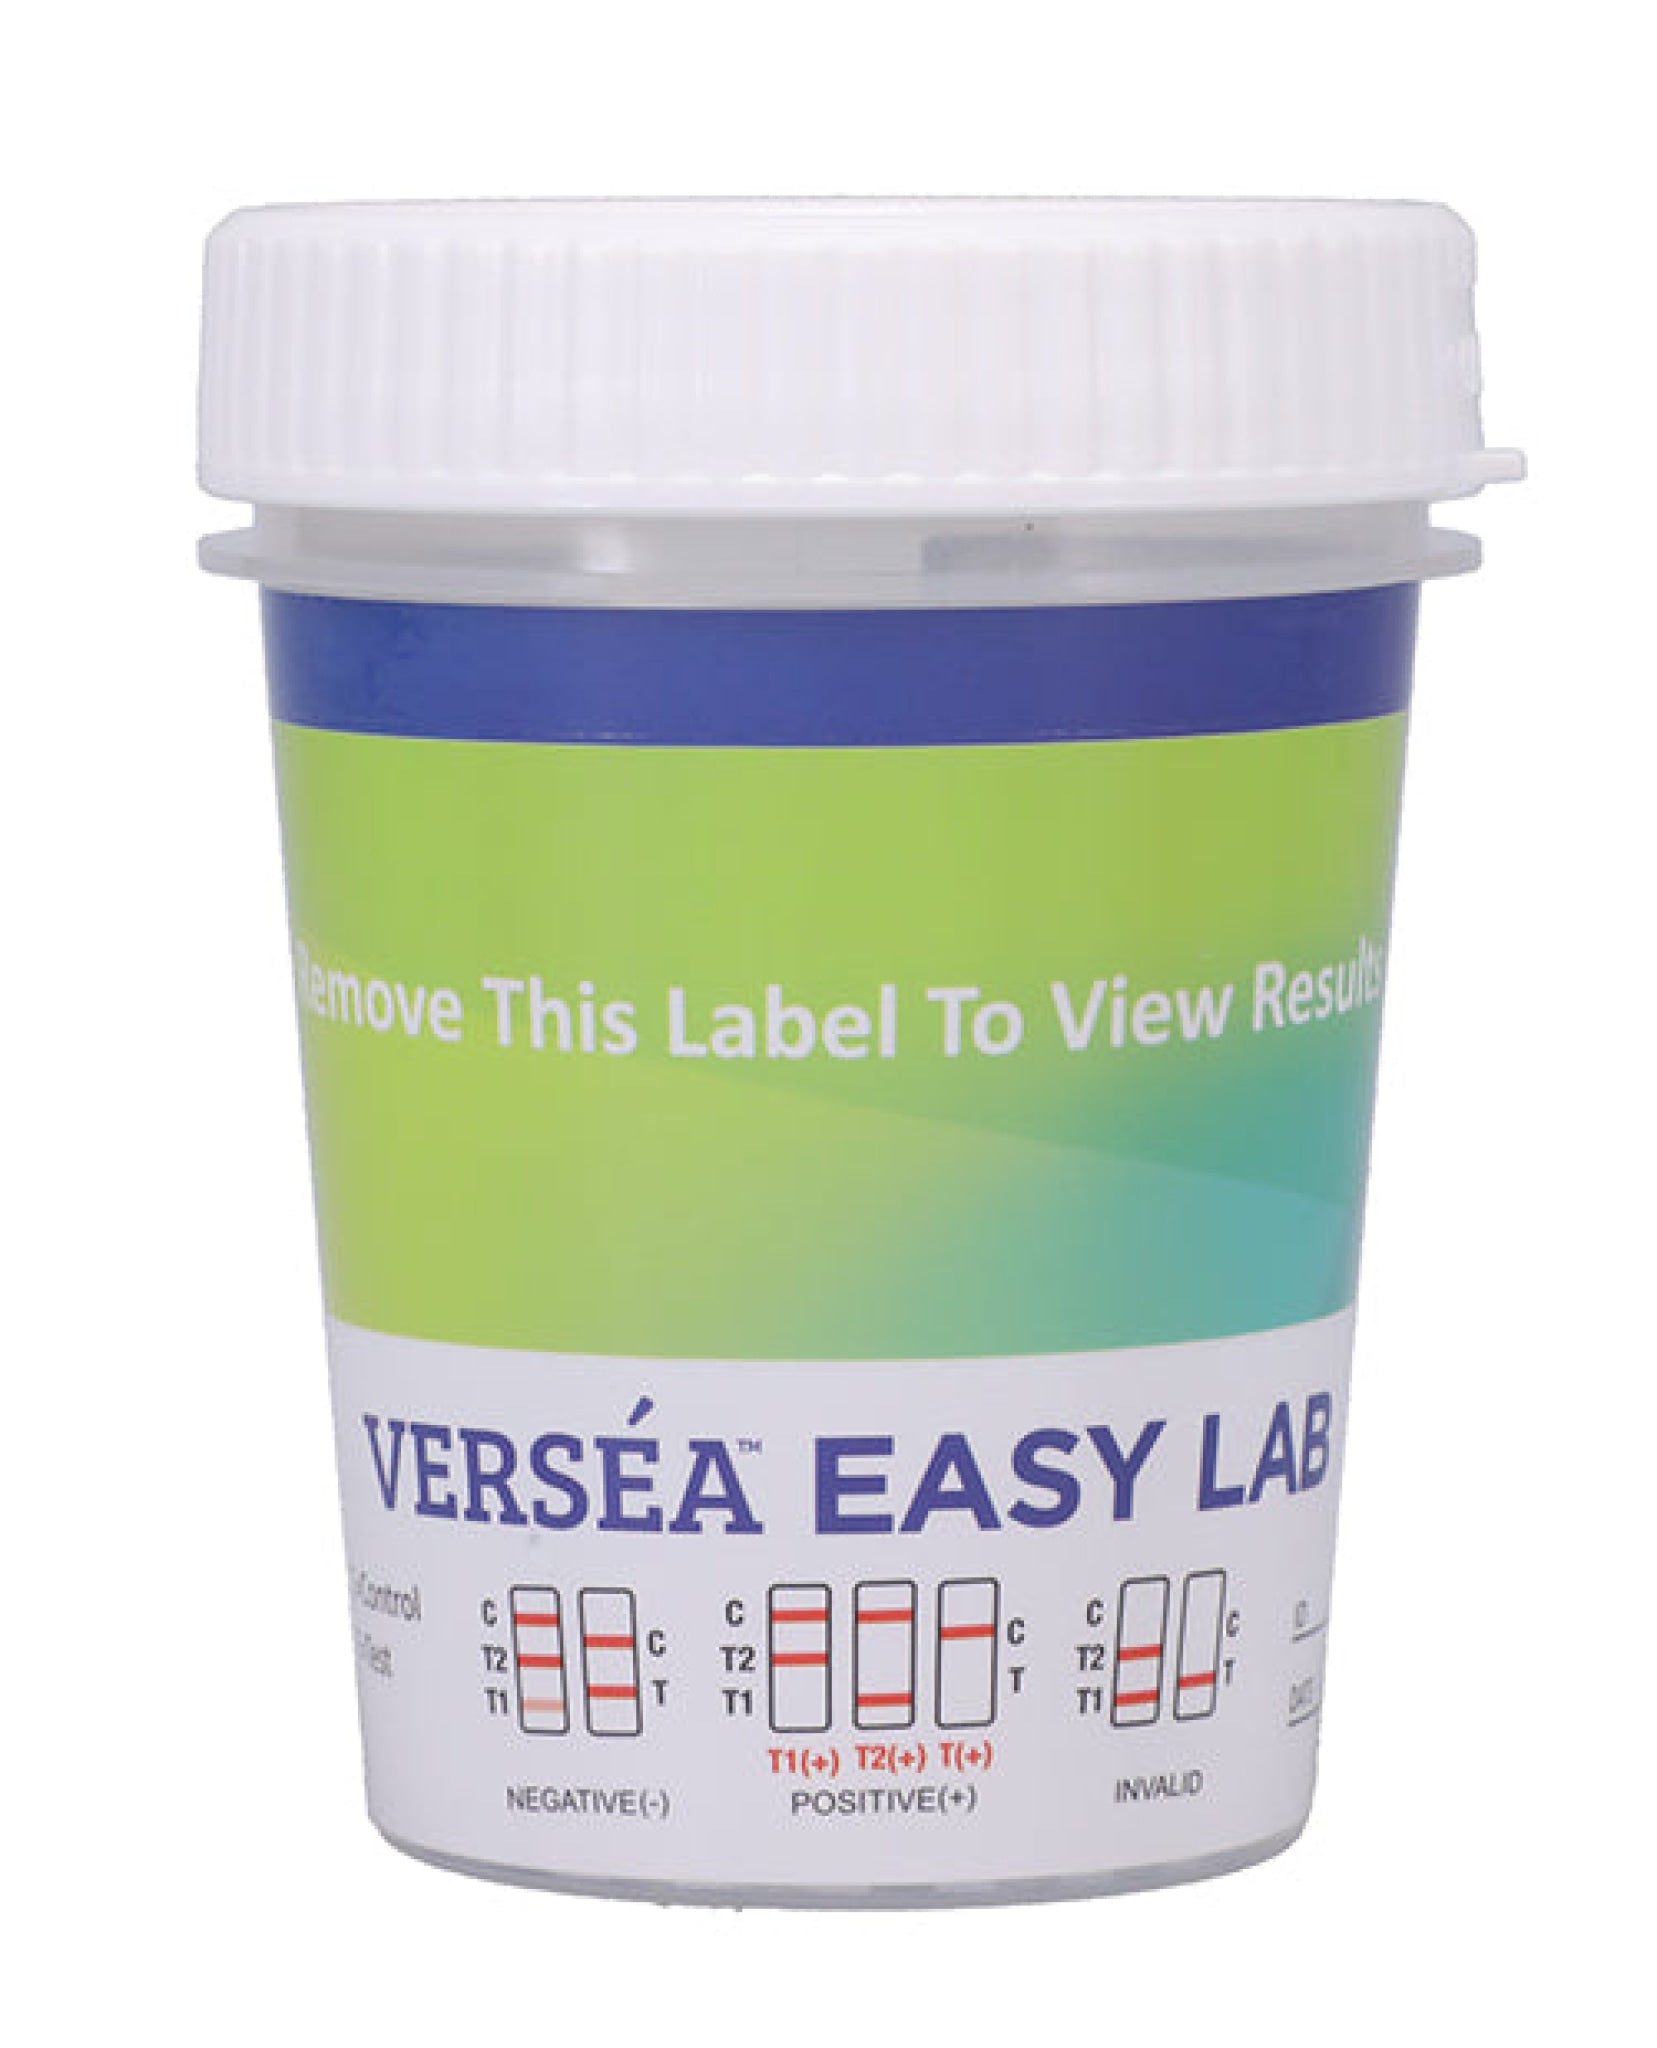 Versea EasyLab 6-Panel Drugs of Abuse Cup Test Doc Johnson Consignment